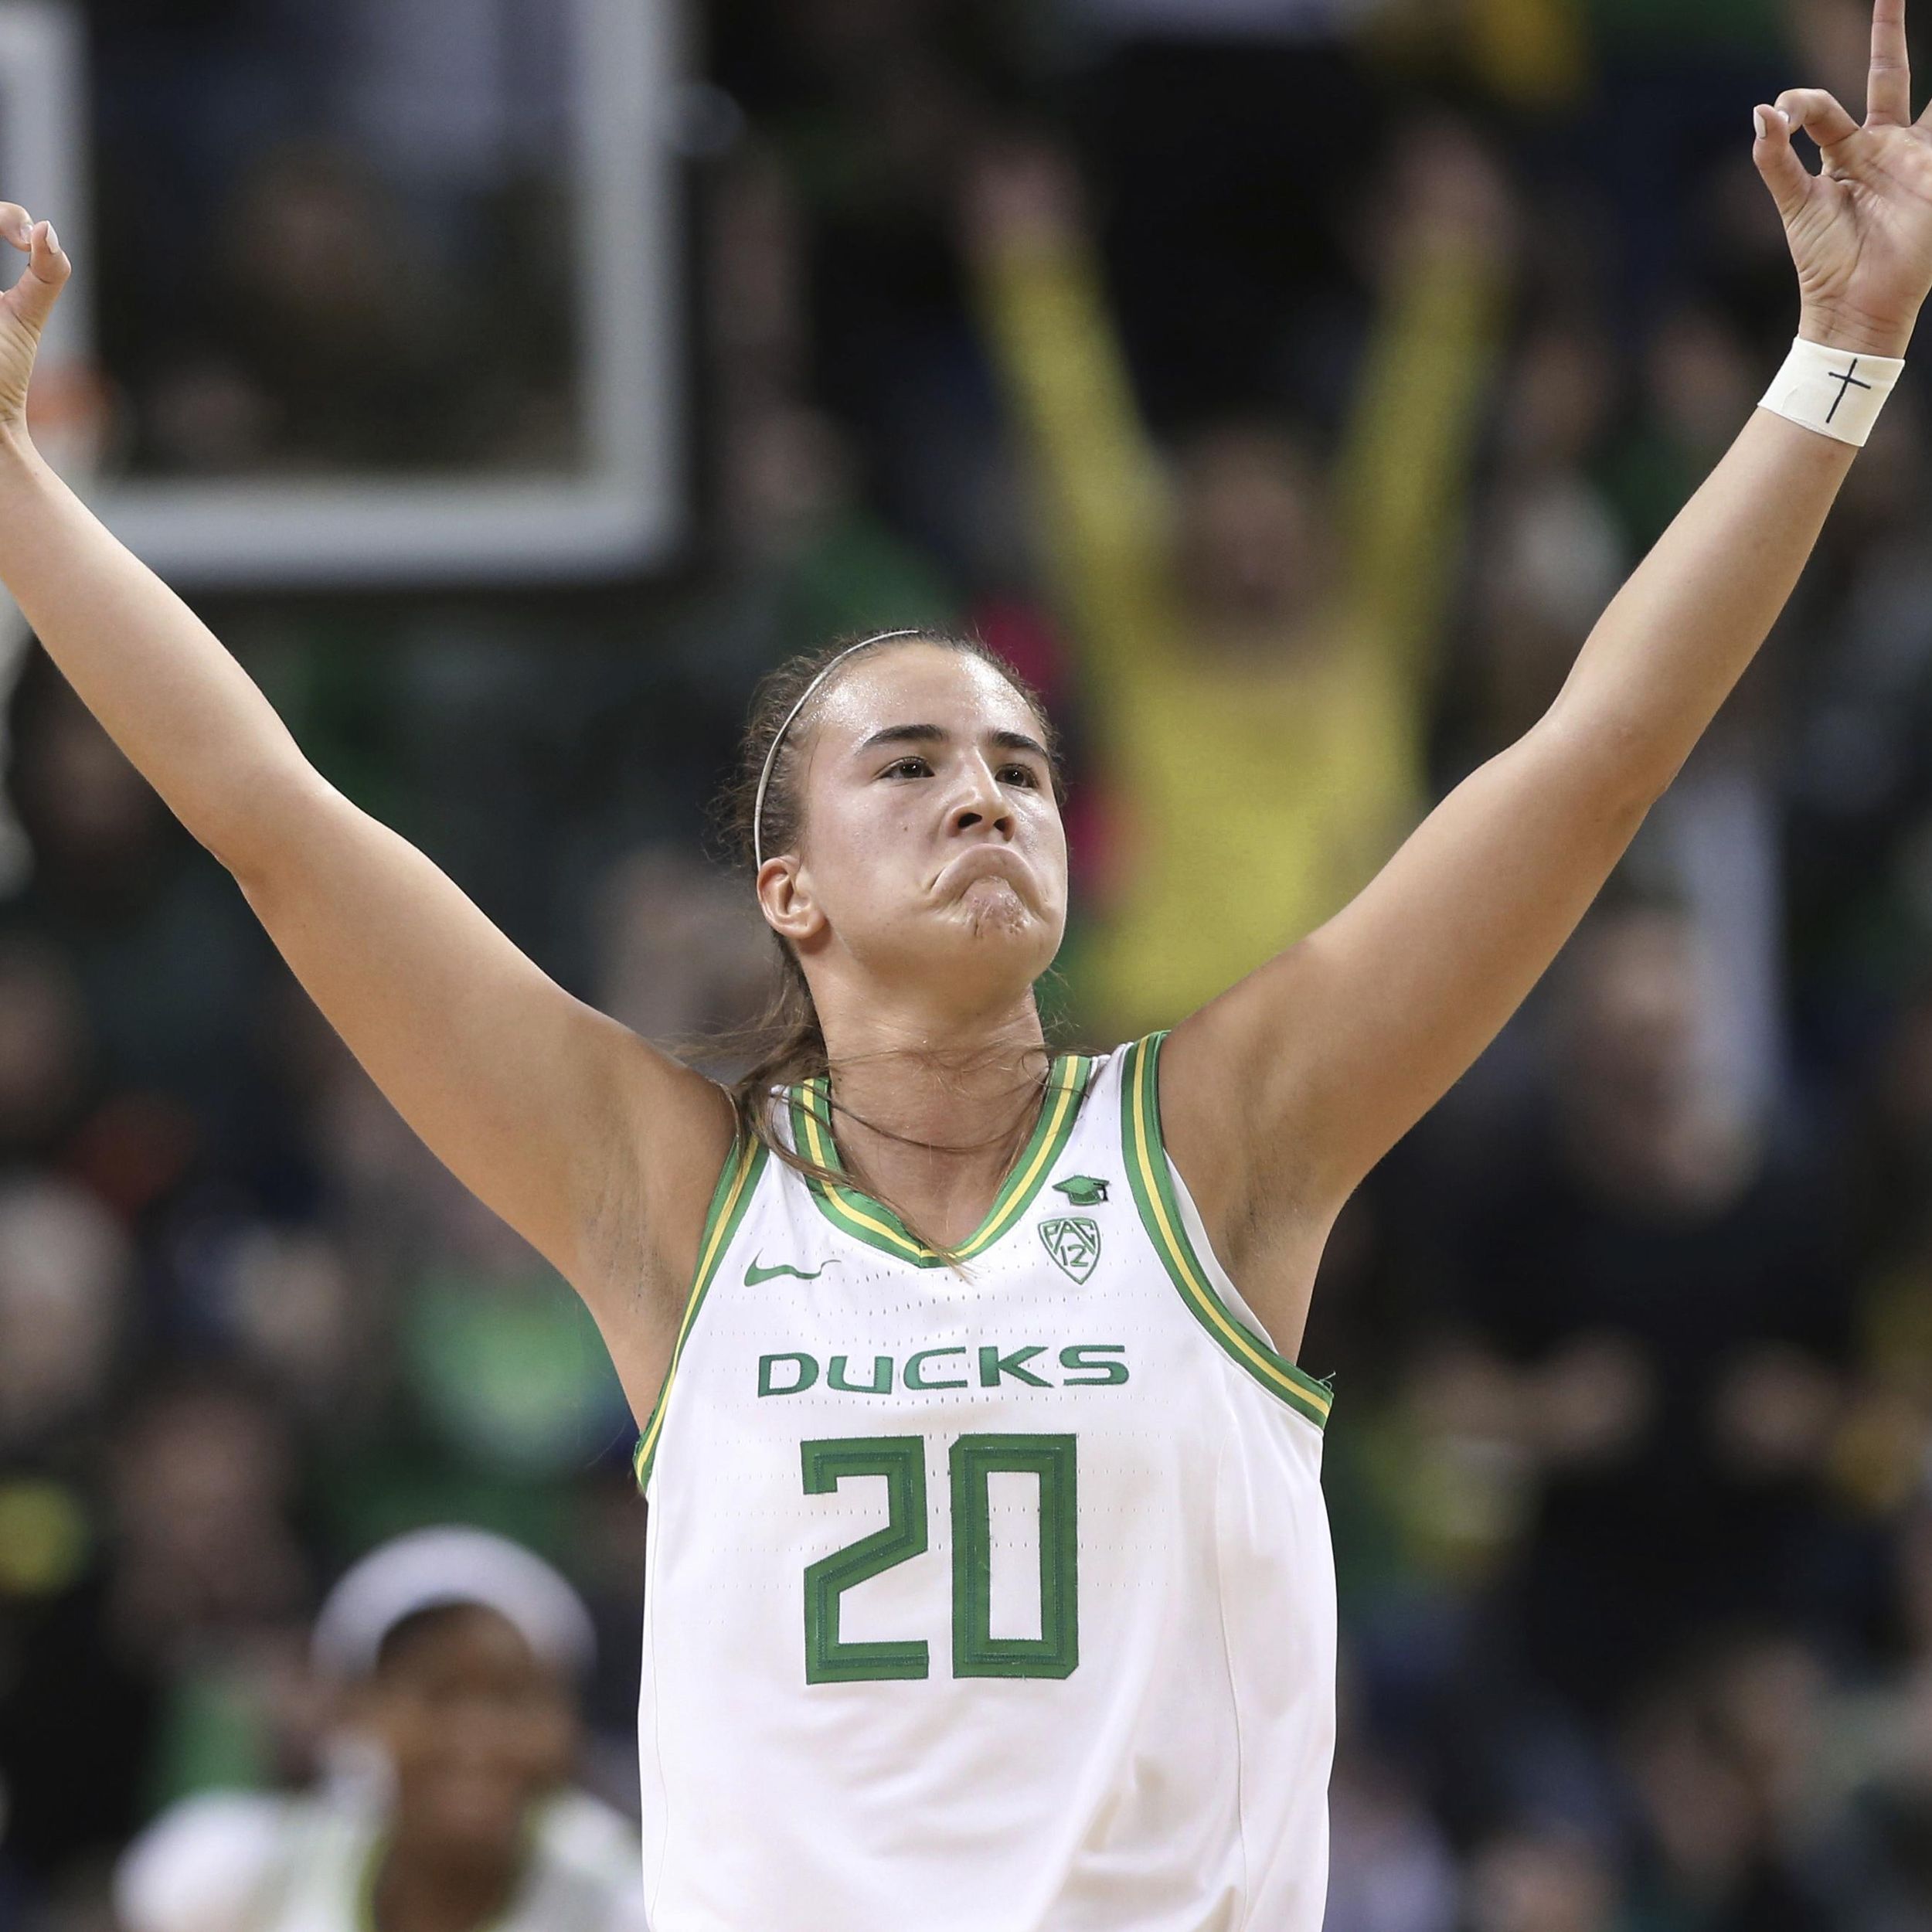 Oregon star Sabrina Ionescu is AP women's player of the year